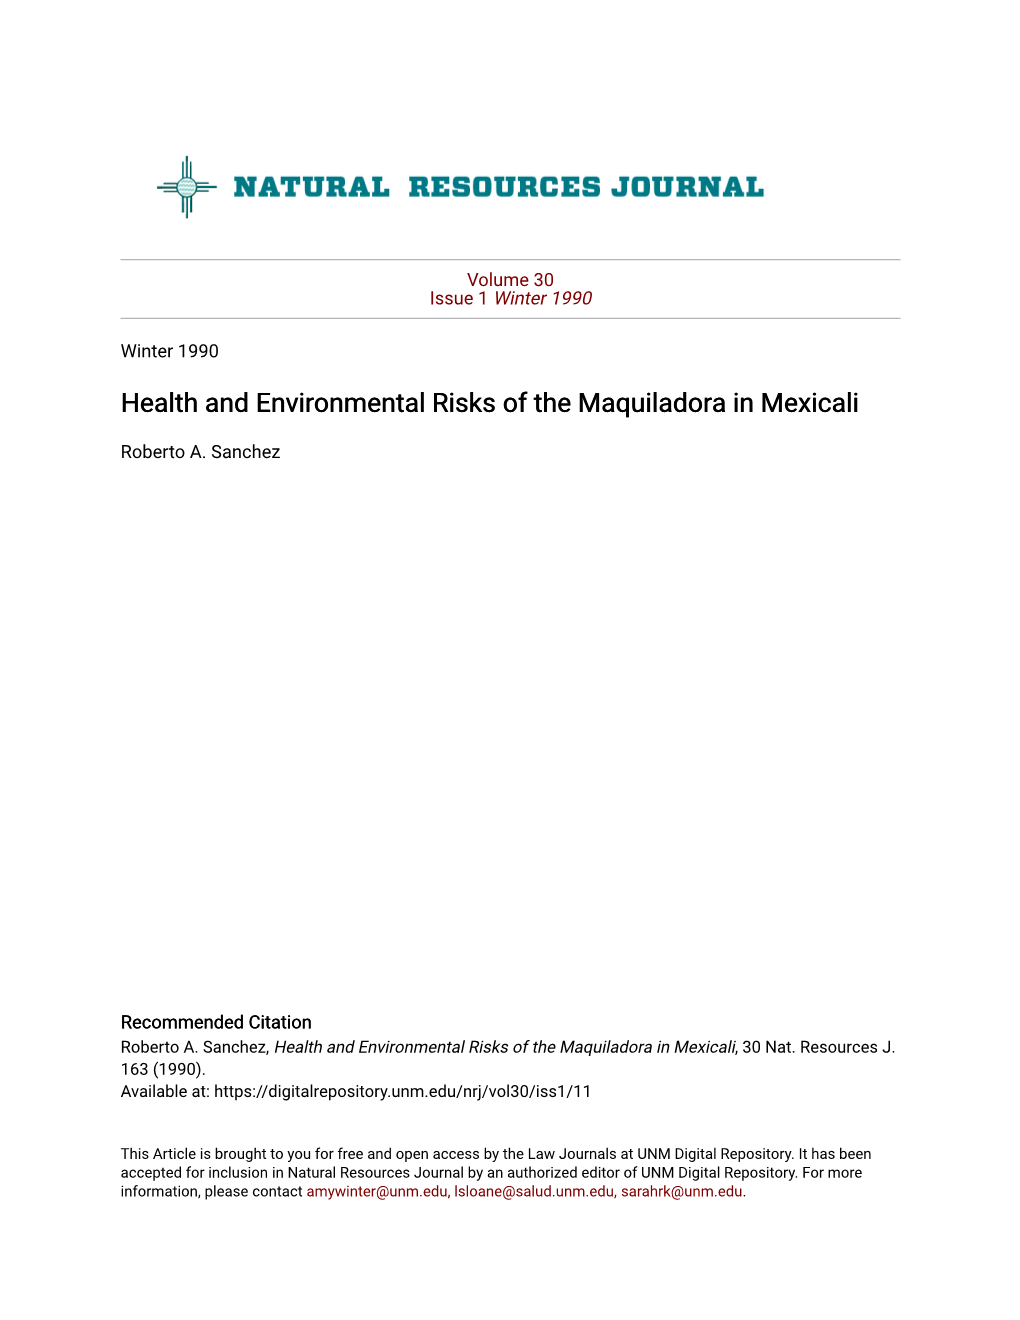 Health and Environmental Risks of the Maquiladora in Mexicali